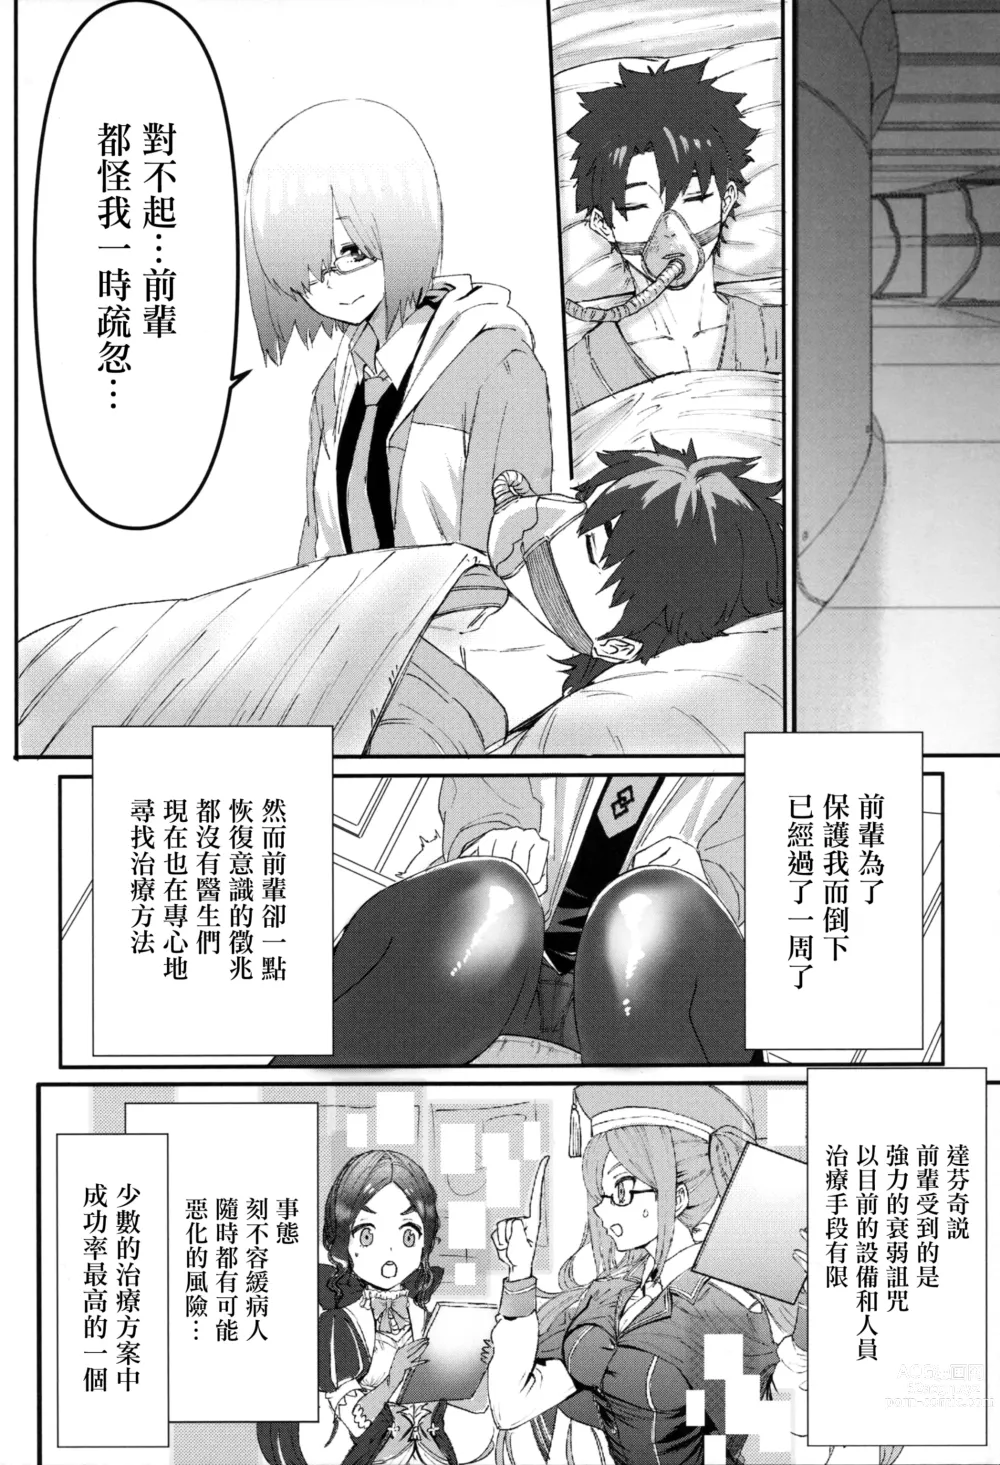 Page 5 of doujinshi 為了前輩NTR瑪修!